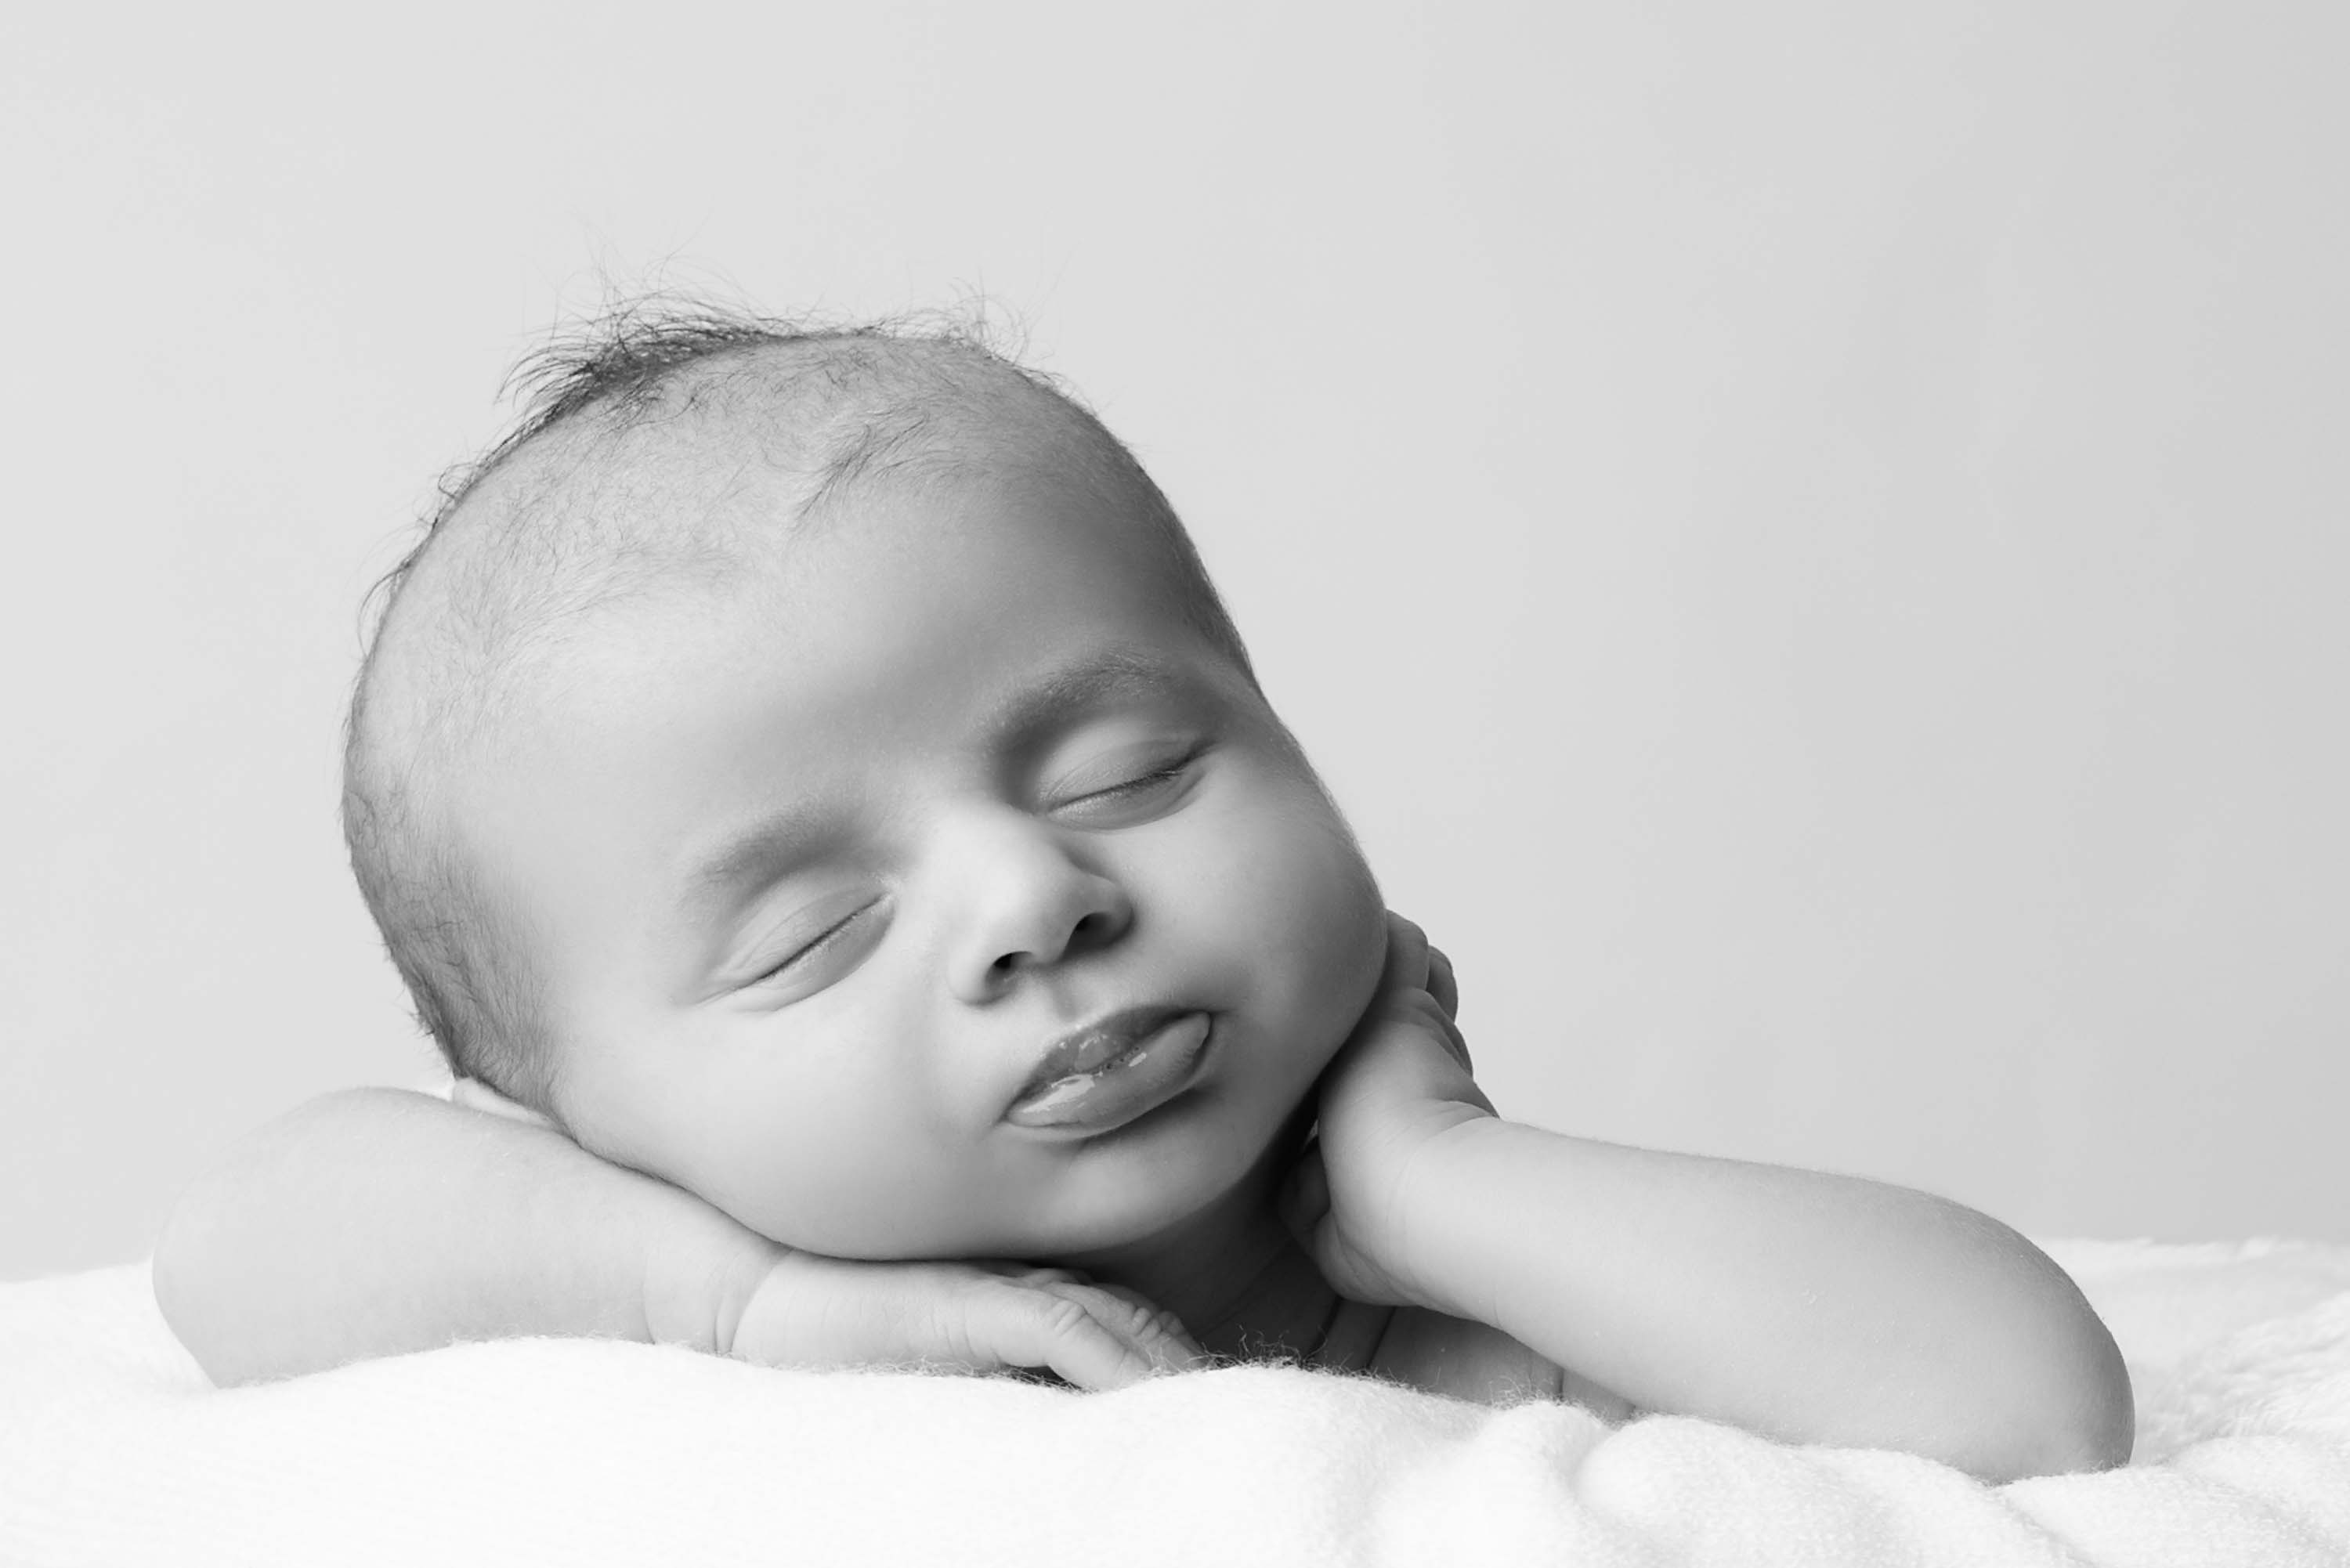 Month old boy looking chilled out, asleep with his head on his arms